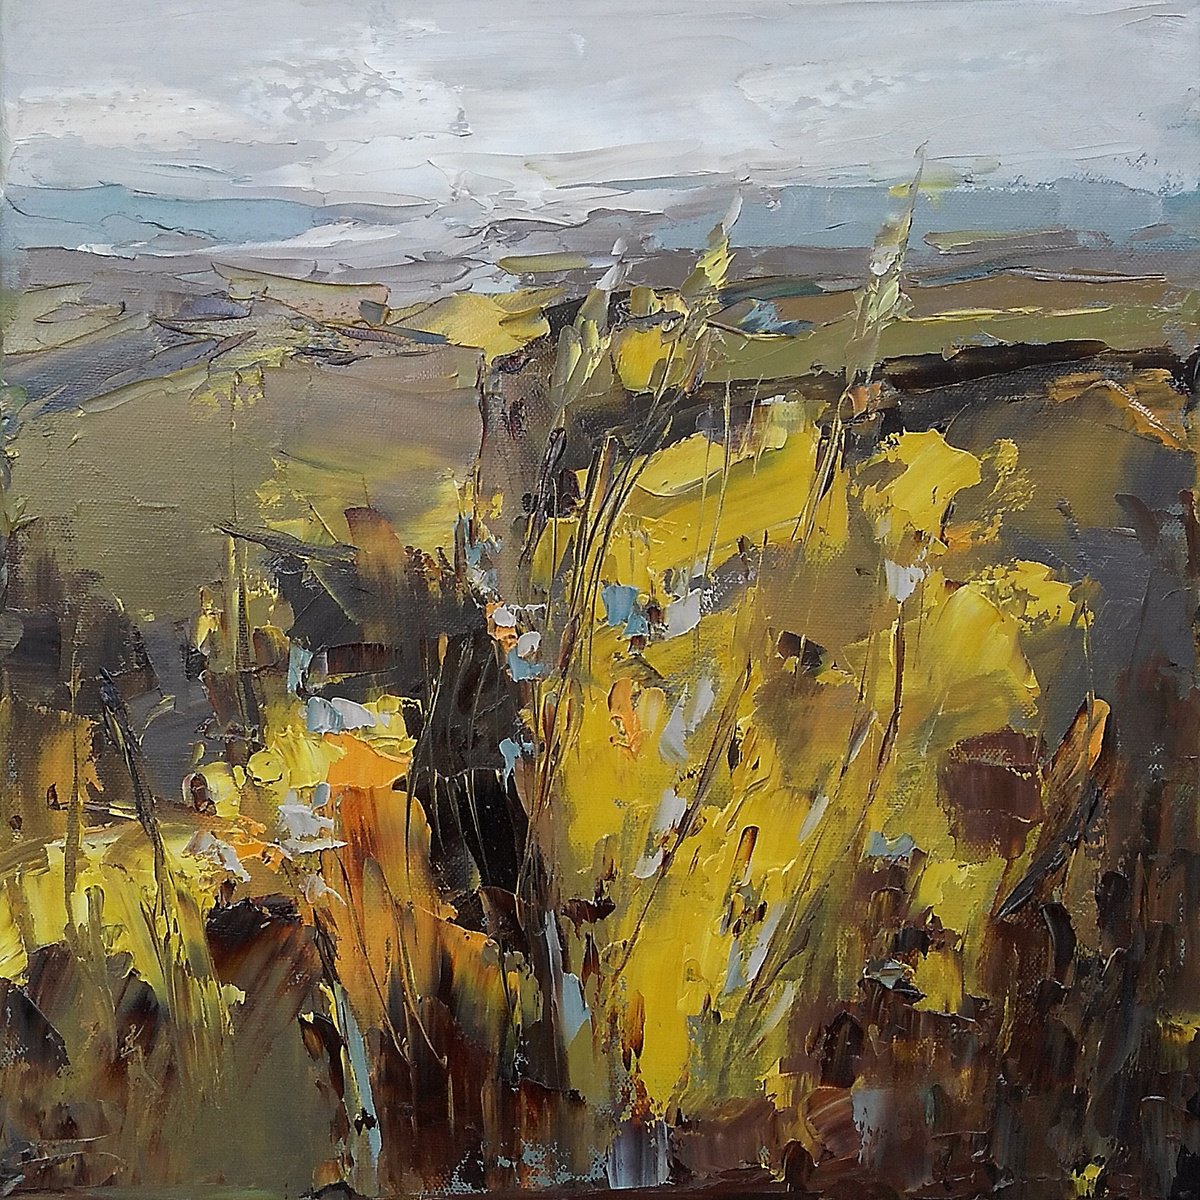 WOULD YOU SIT WITH ME FOR A WHILE, 40x40cm, autumn fields landscape by Emilia Milcheva